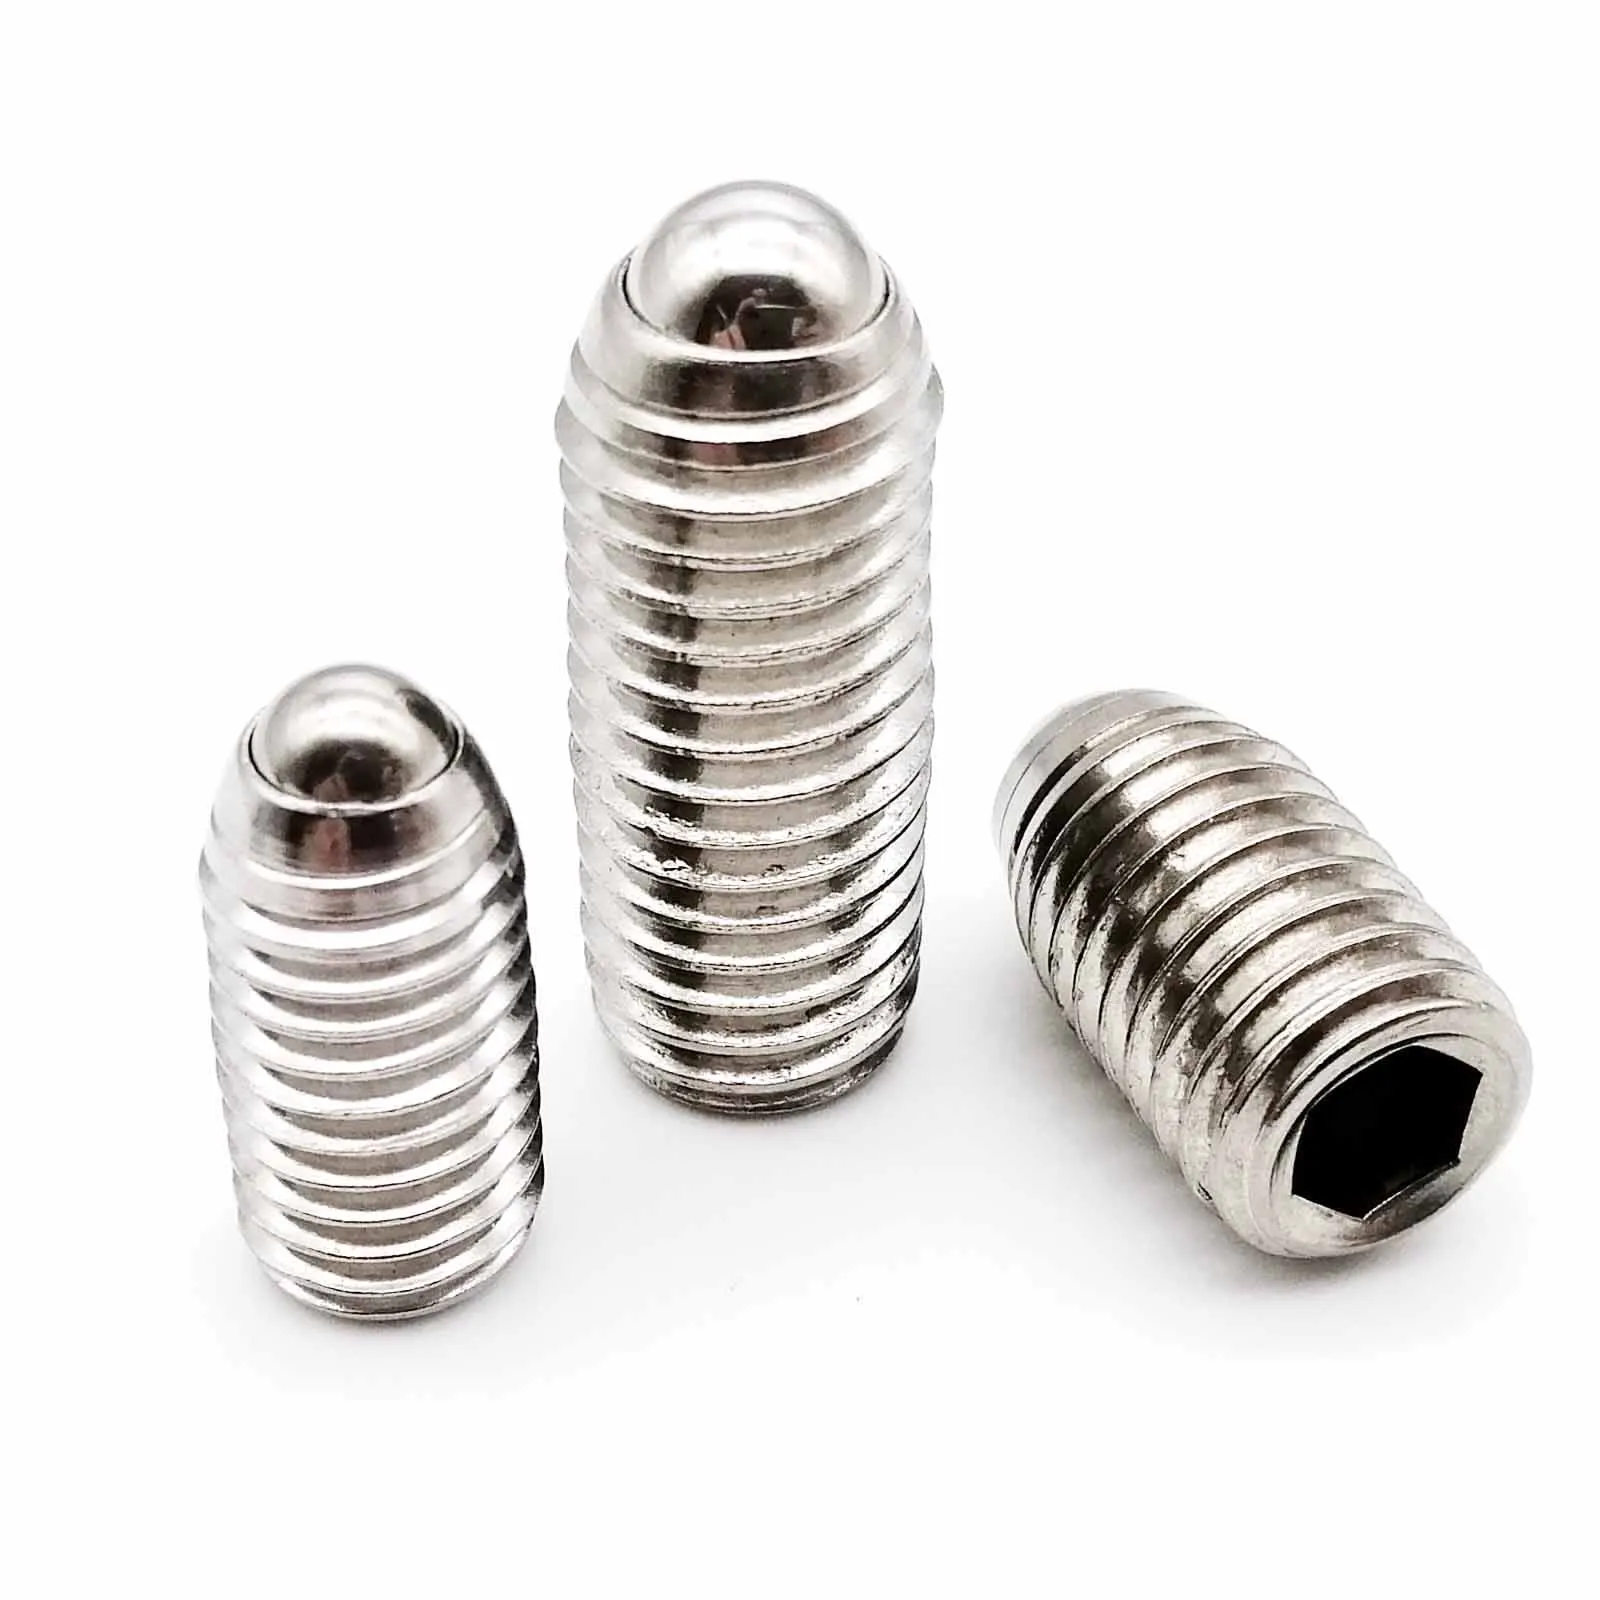 M3-M16 Hex Socket Spring Ball Plunger Grub Point Screw Bolt-A2 Stainless Steel 